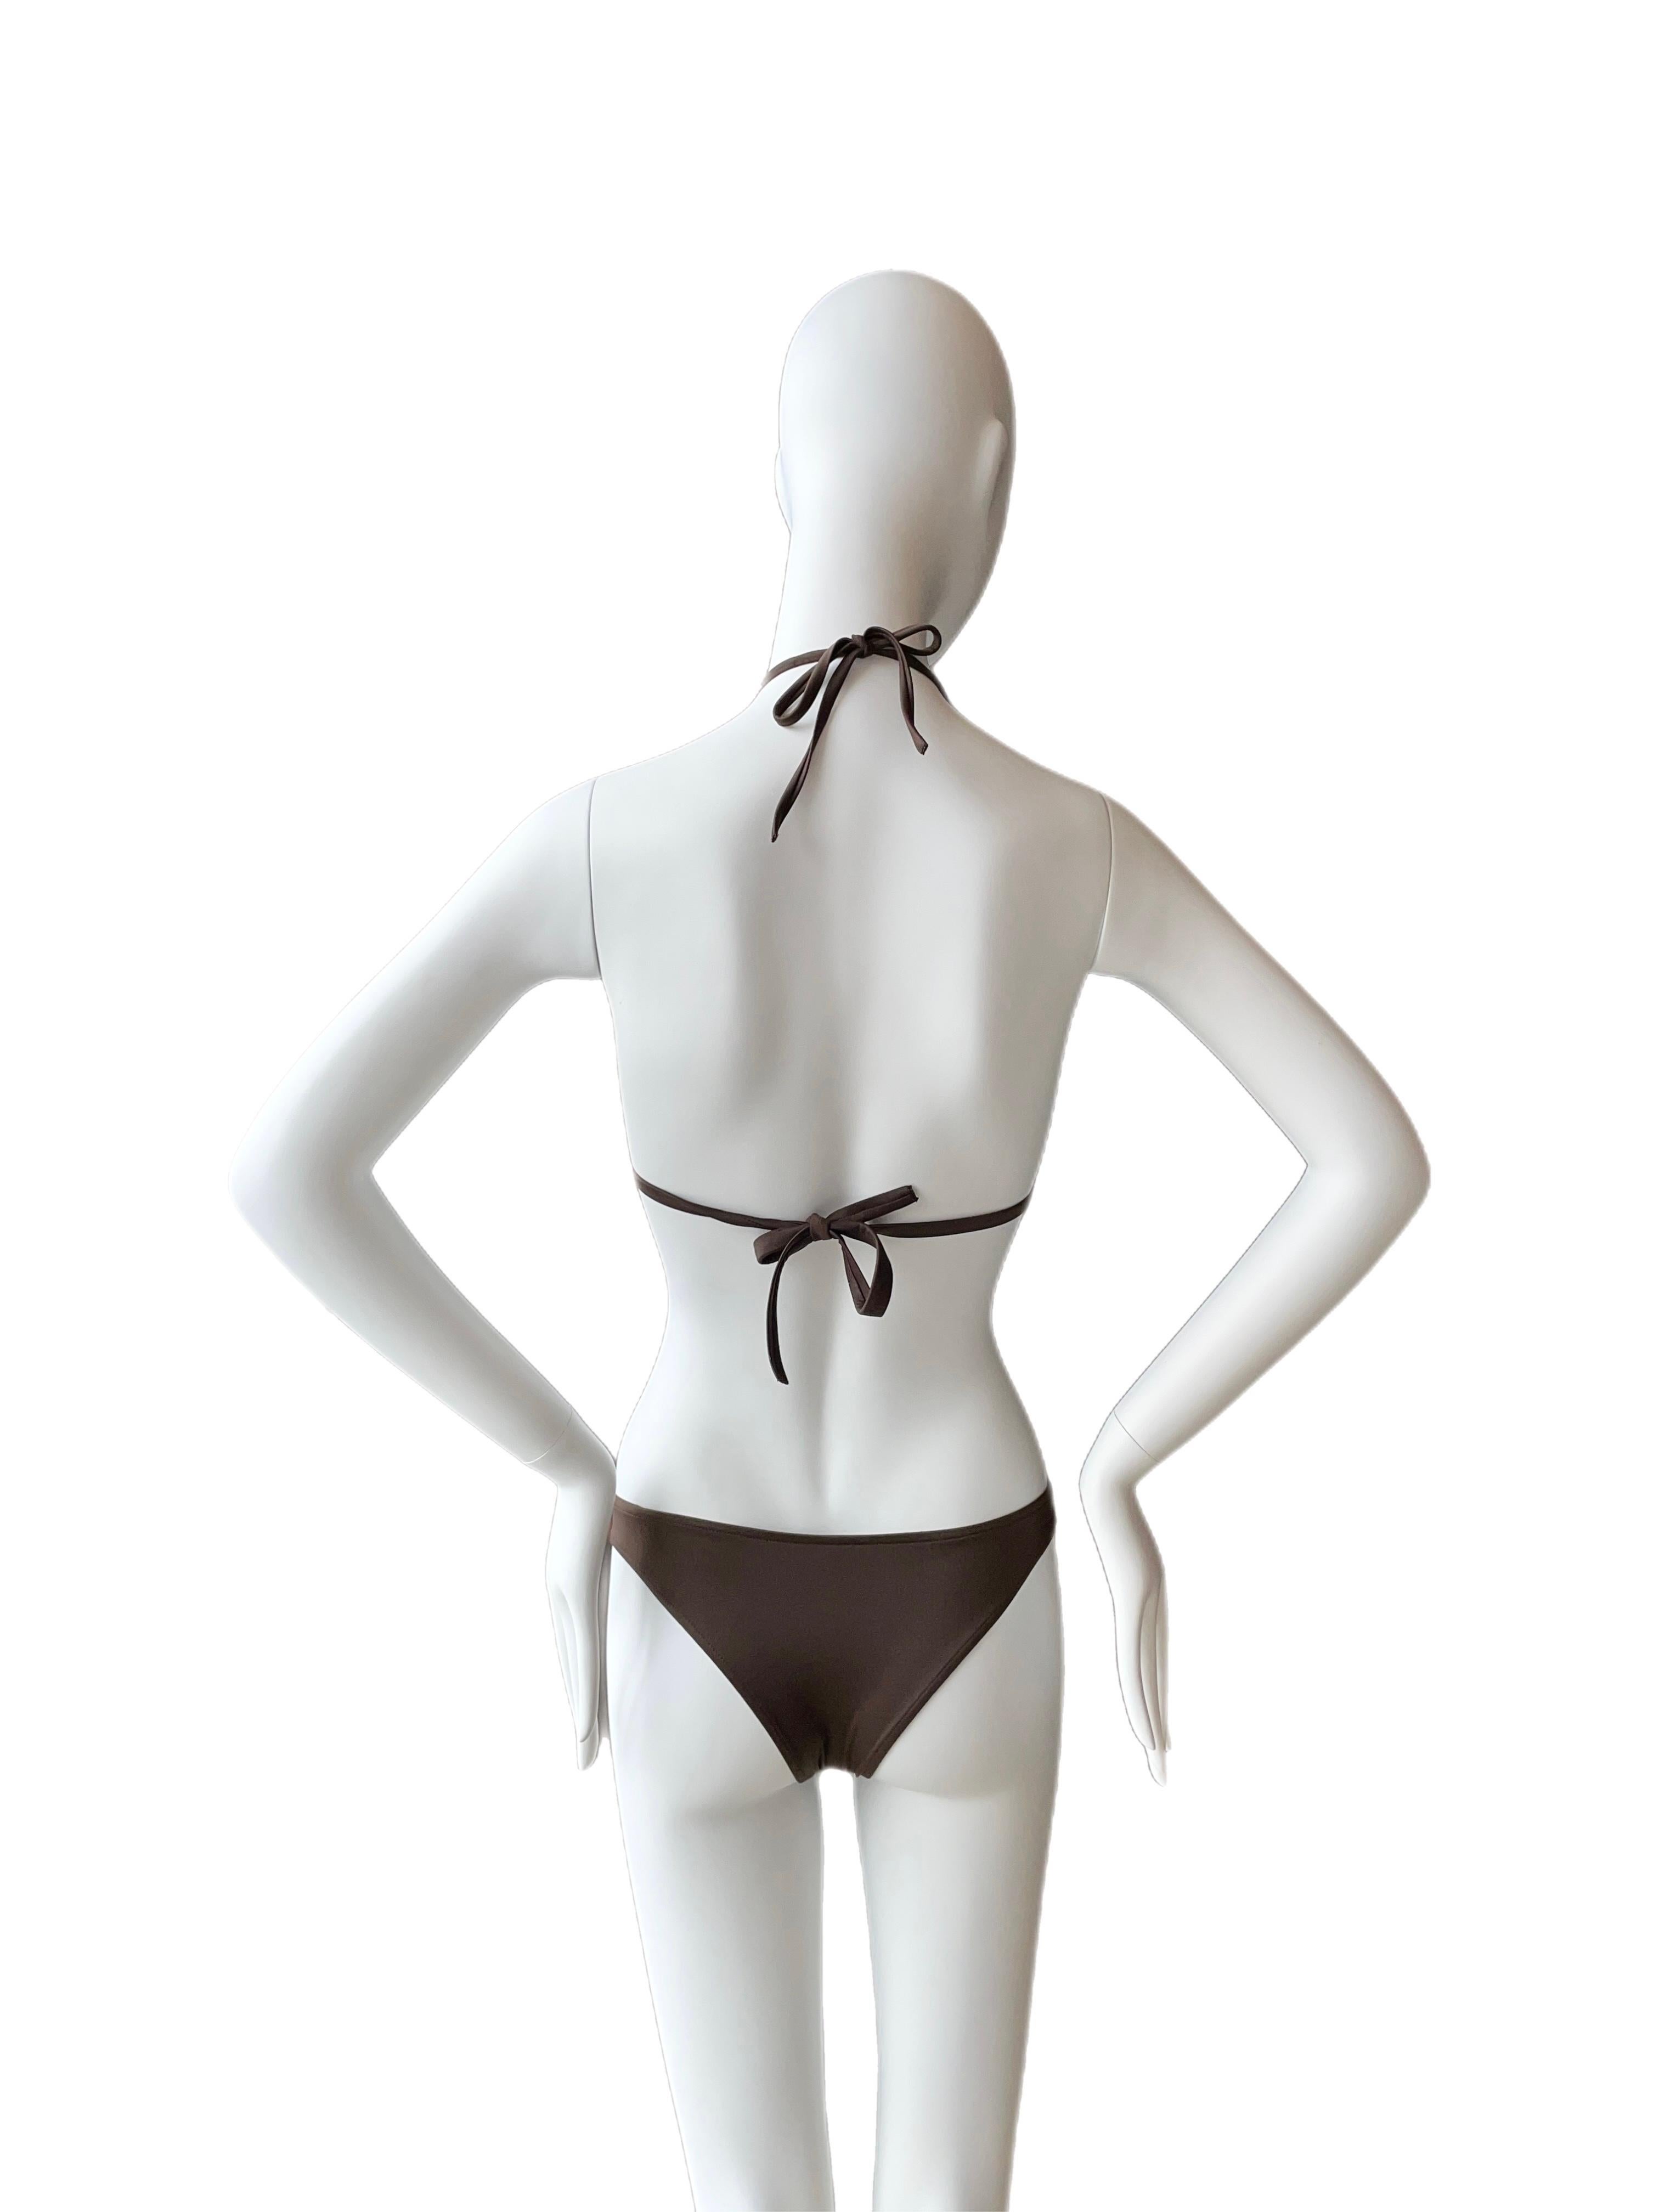 John Galliano for Christian Dior vintage bikini. New with tags. Size F38. Chocolate brown color. Has stretch. Bottoms waist 13.5